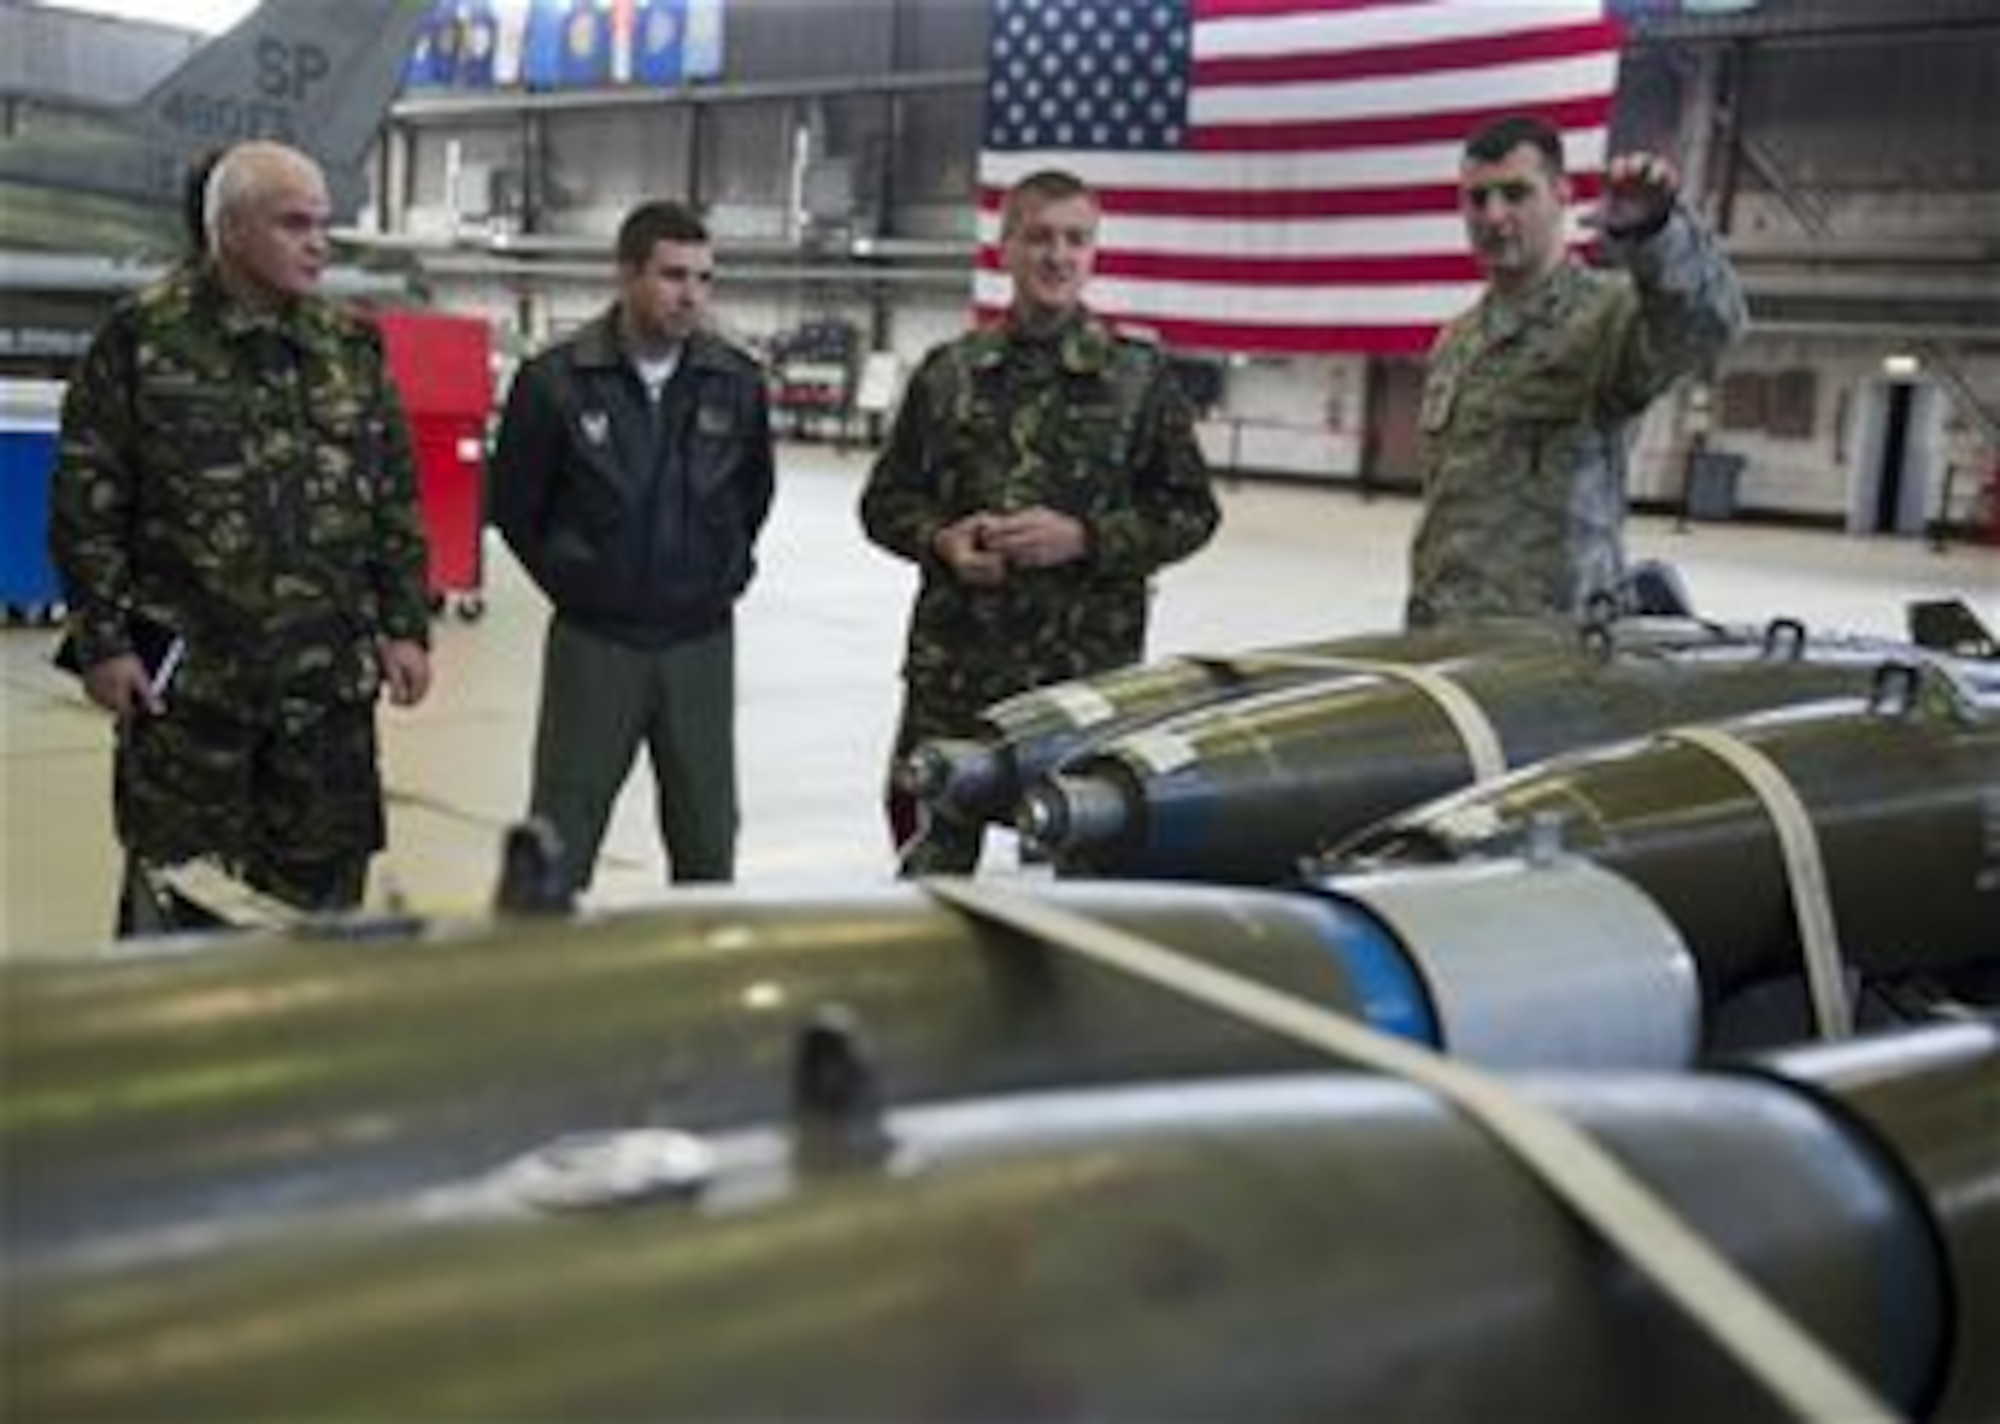 U.S. Air Force Capt. Warren Smith, 52nd Maintenance Group maintenance operations officer in charge, explains weapon capabilities to members of the Romanian air force during a familiarization tour at Spangdahlem Air Base, Germany, March 25, 2014. The visit was the first in a series of engagements aimed at helping the Romanian air force stand up their first F-16 Fighting Falcon fighter aircraft squadron. (U.S. Air Force photo by Staff Sgt. Chad Warren/Released)